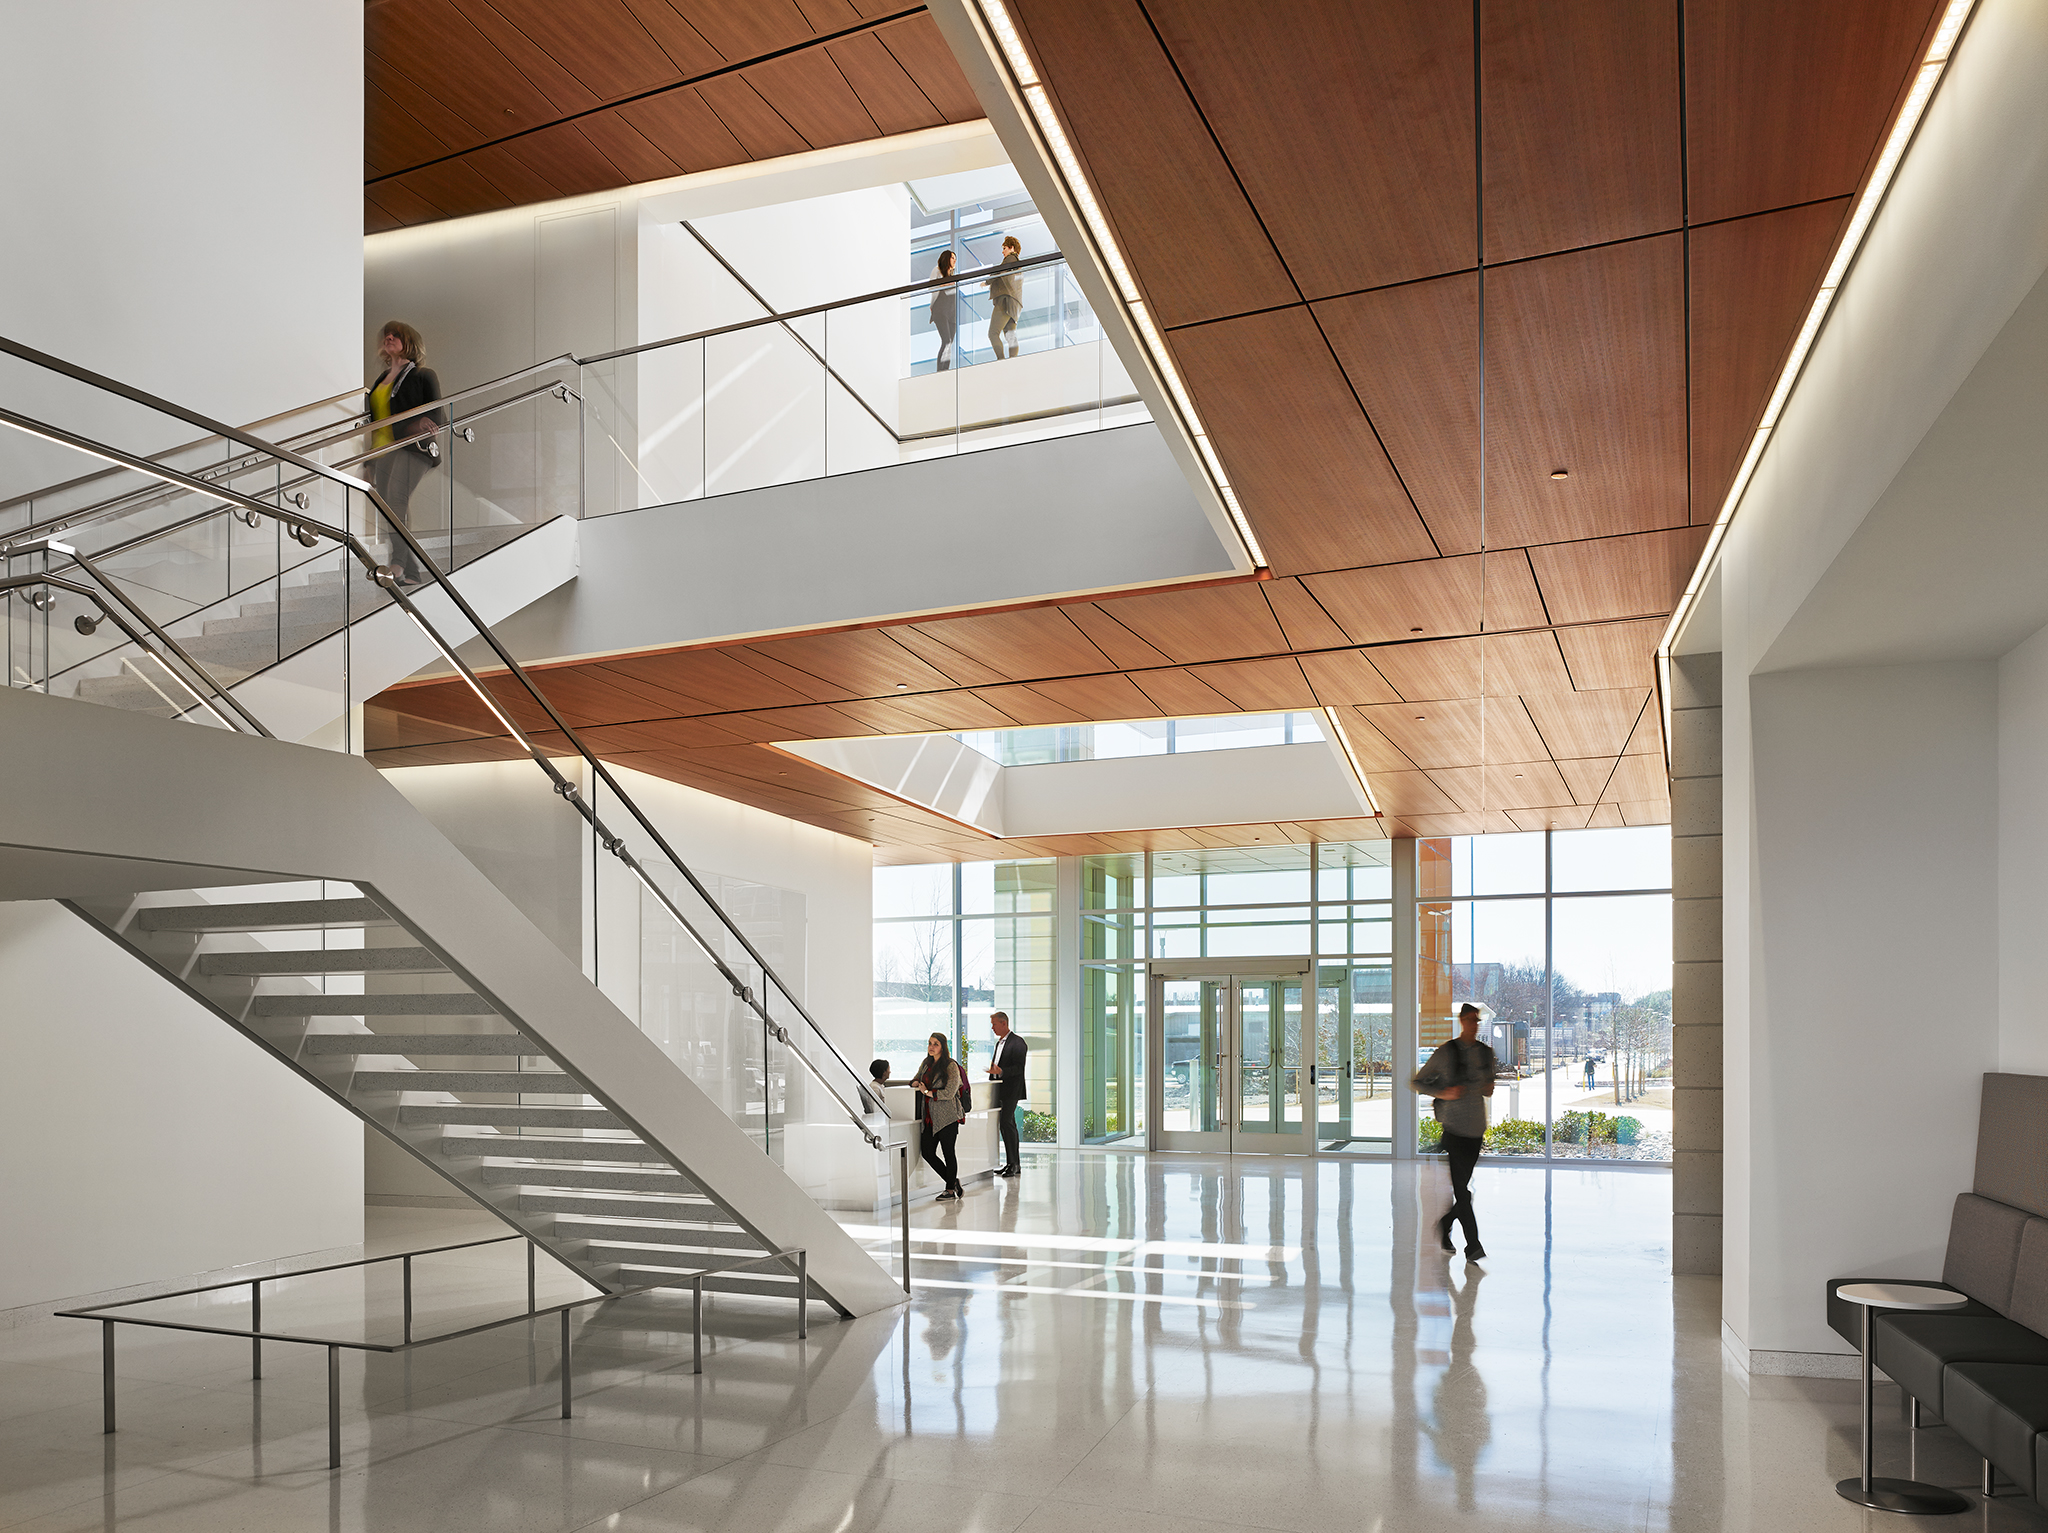  BioEngineering Sciences Building  University of Texas  ZGF Architects  Dallas, Texas      Return to Projects  